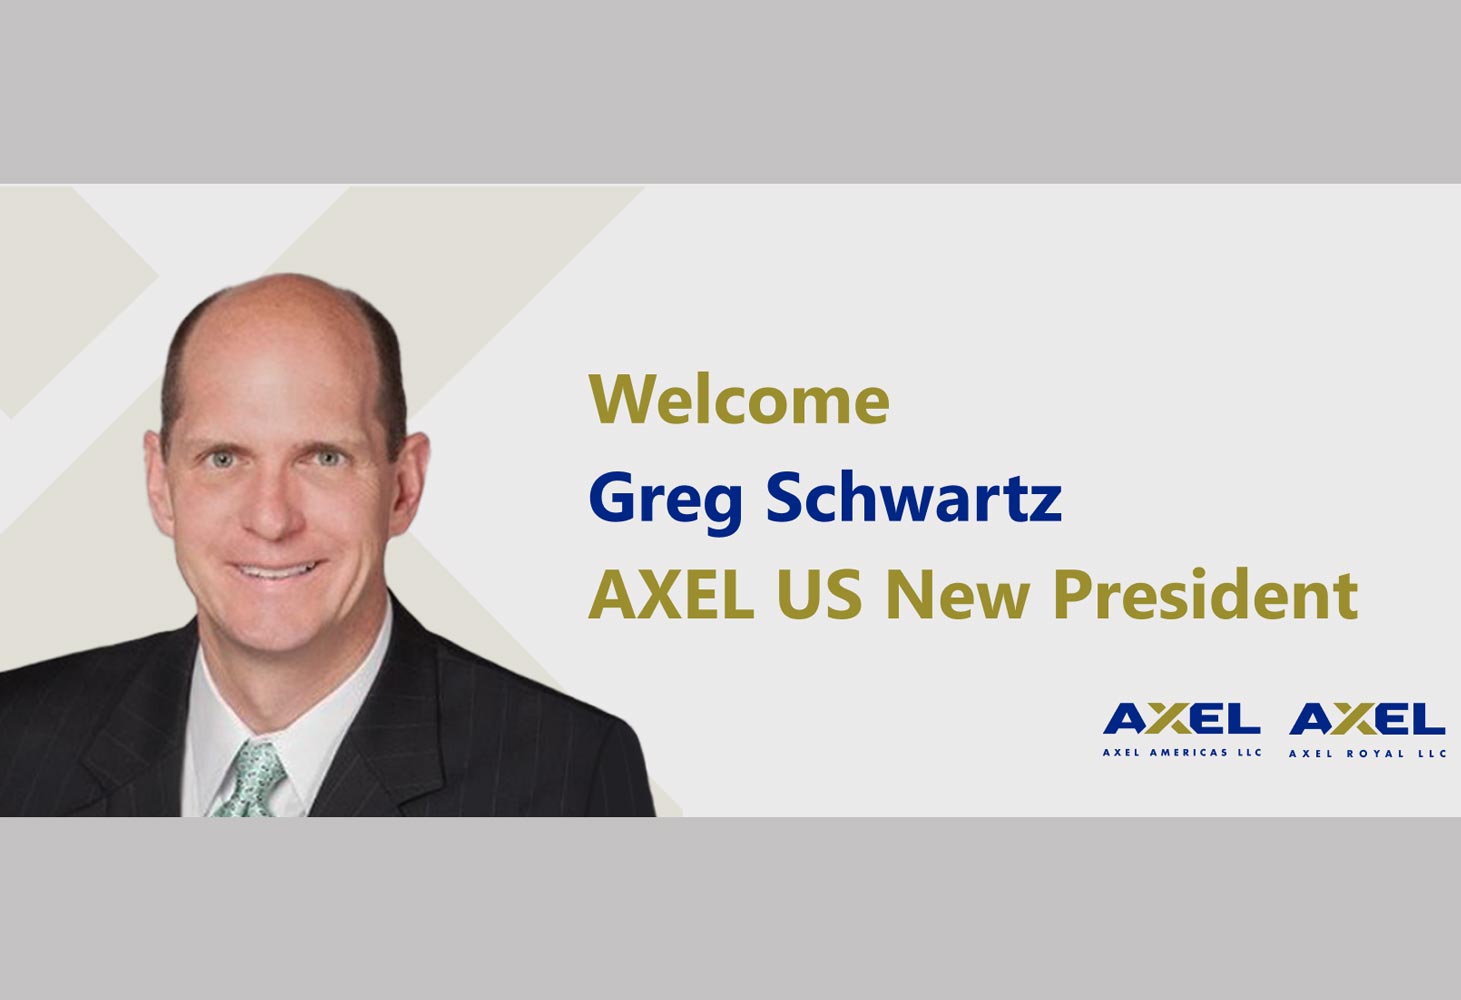 Greg Schwartz is the new president for AXEL Americas and AXEL Royal